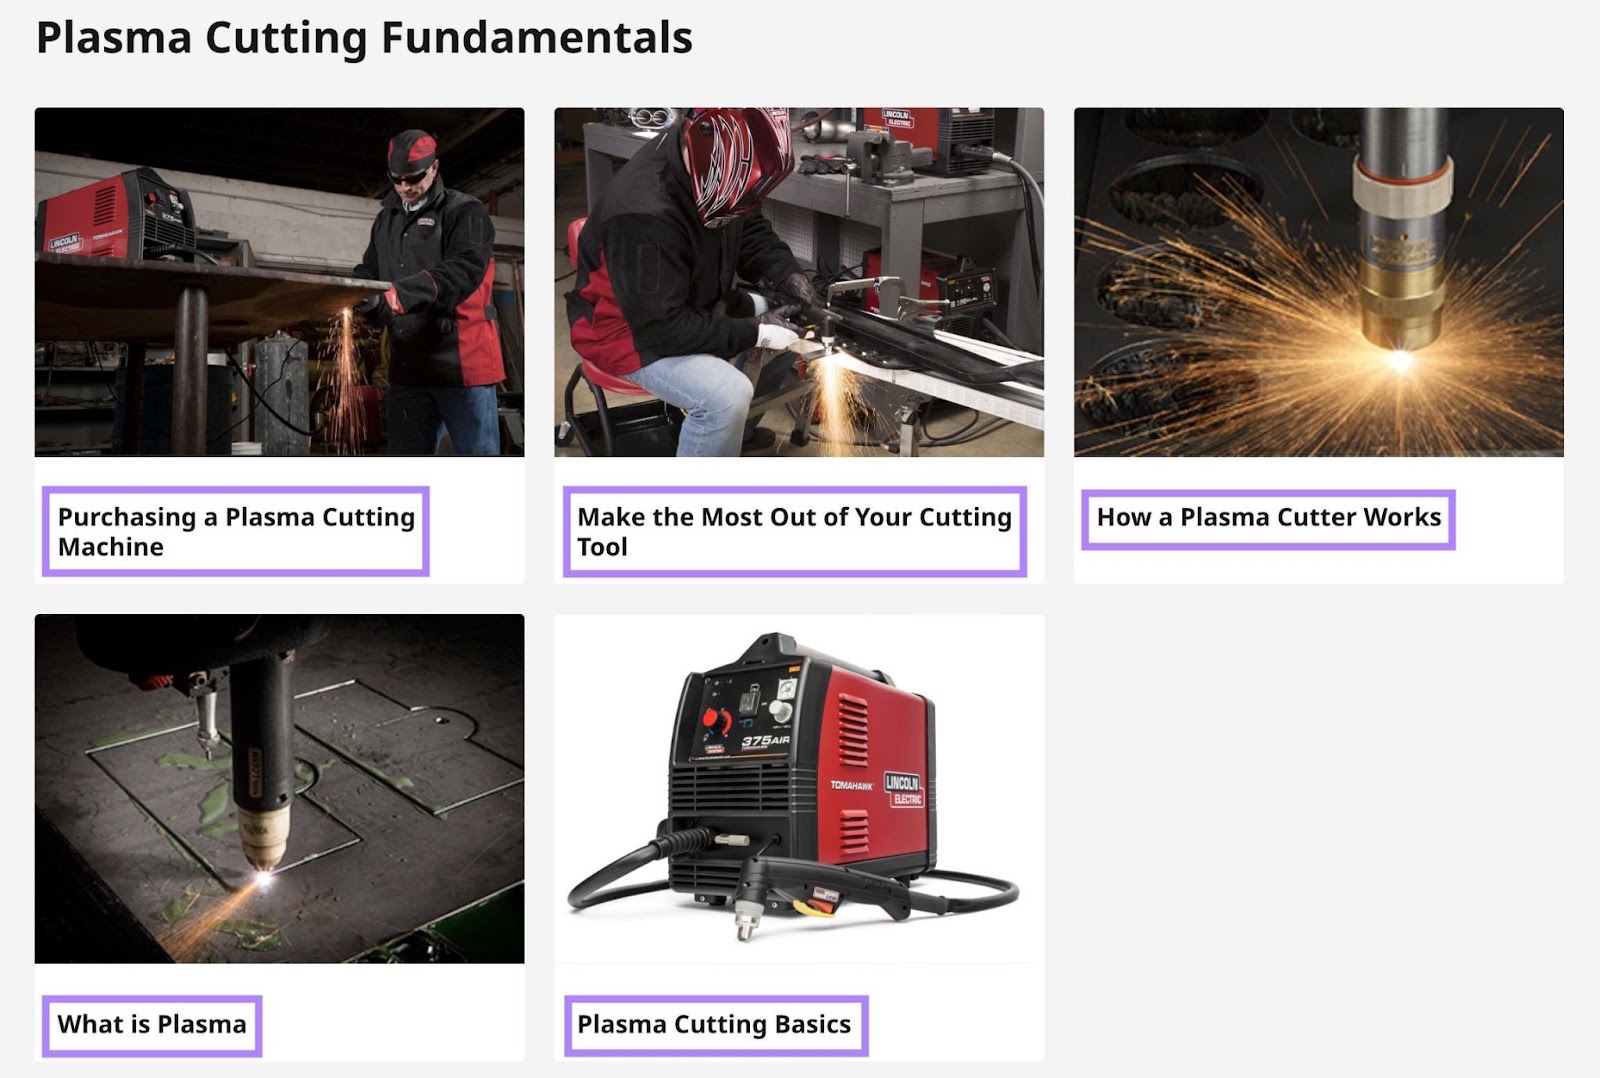 A pillar page for plasma cutting fundamentals that internally links to relevant pages by Lincoln Electric.